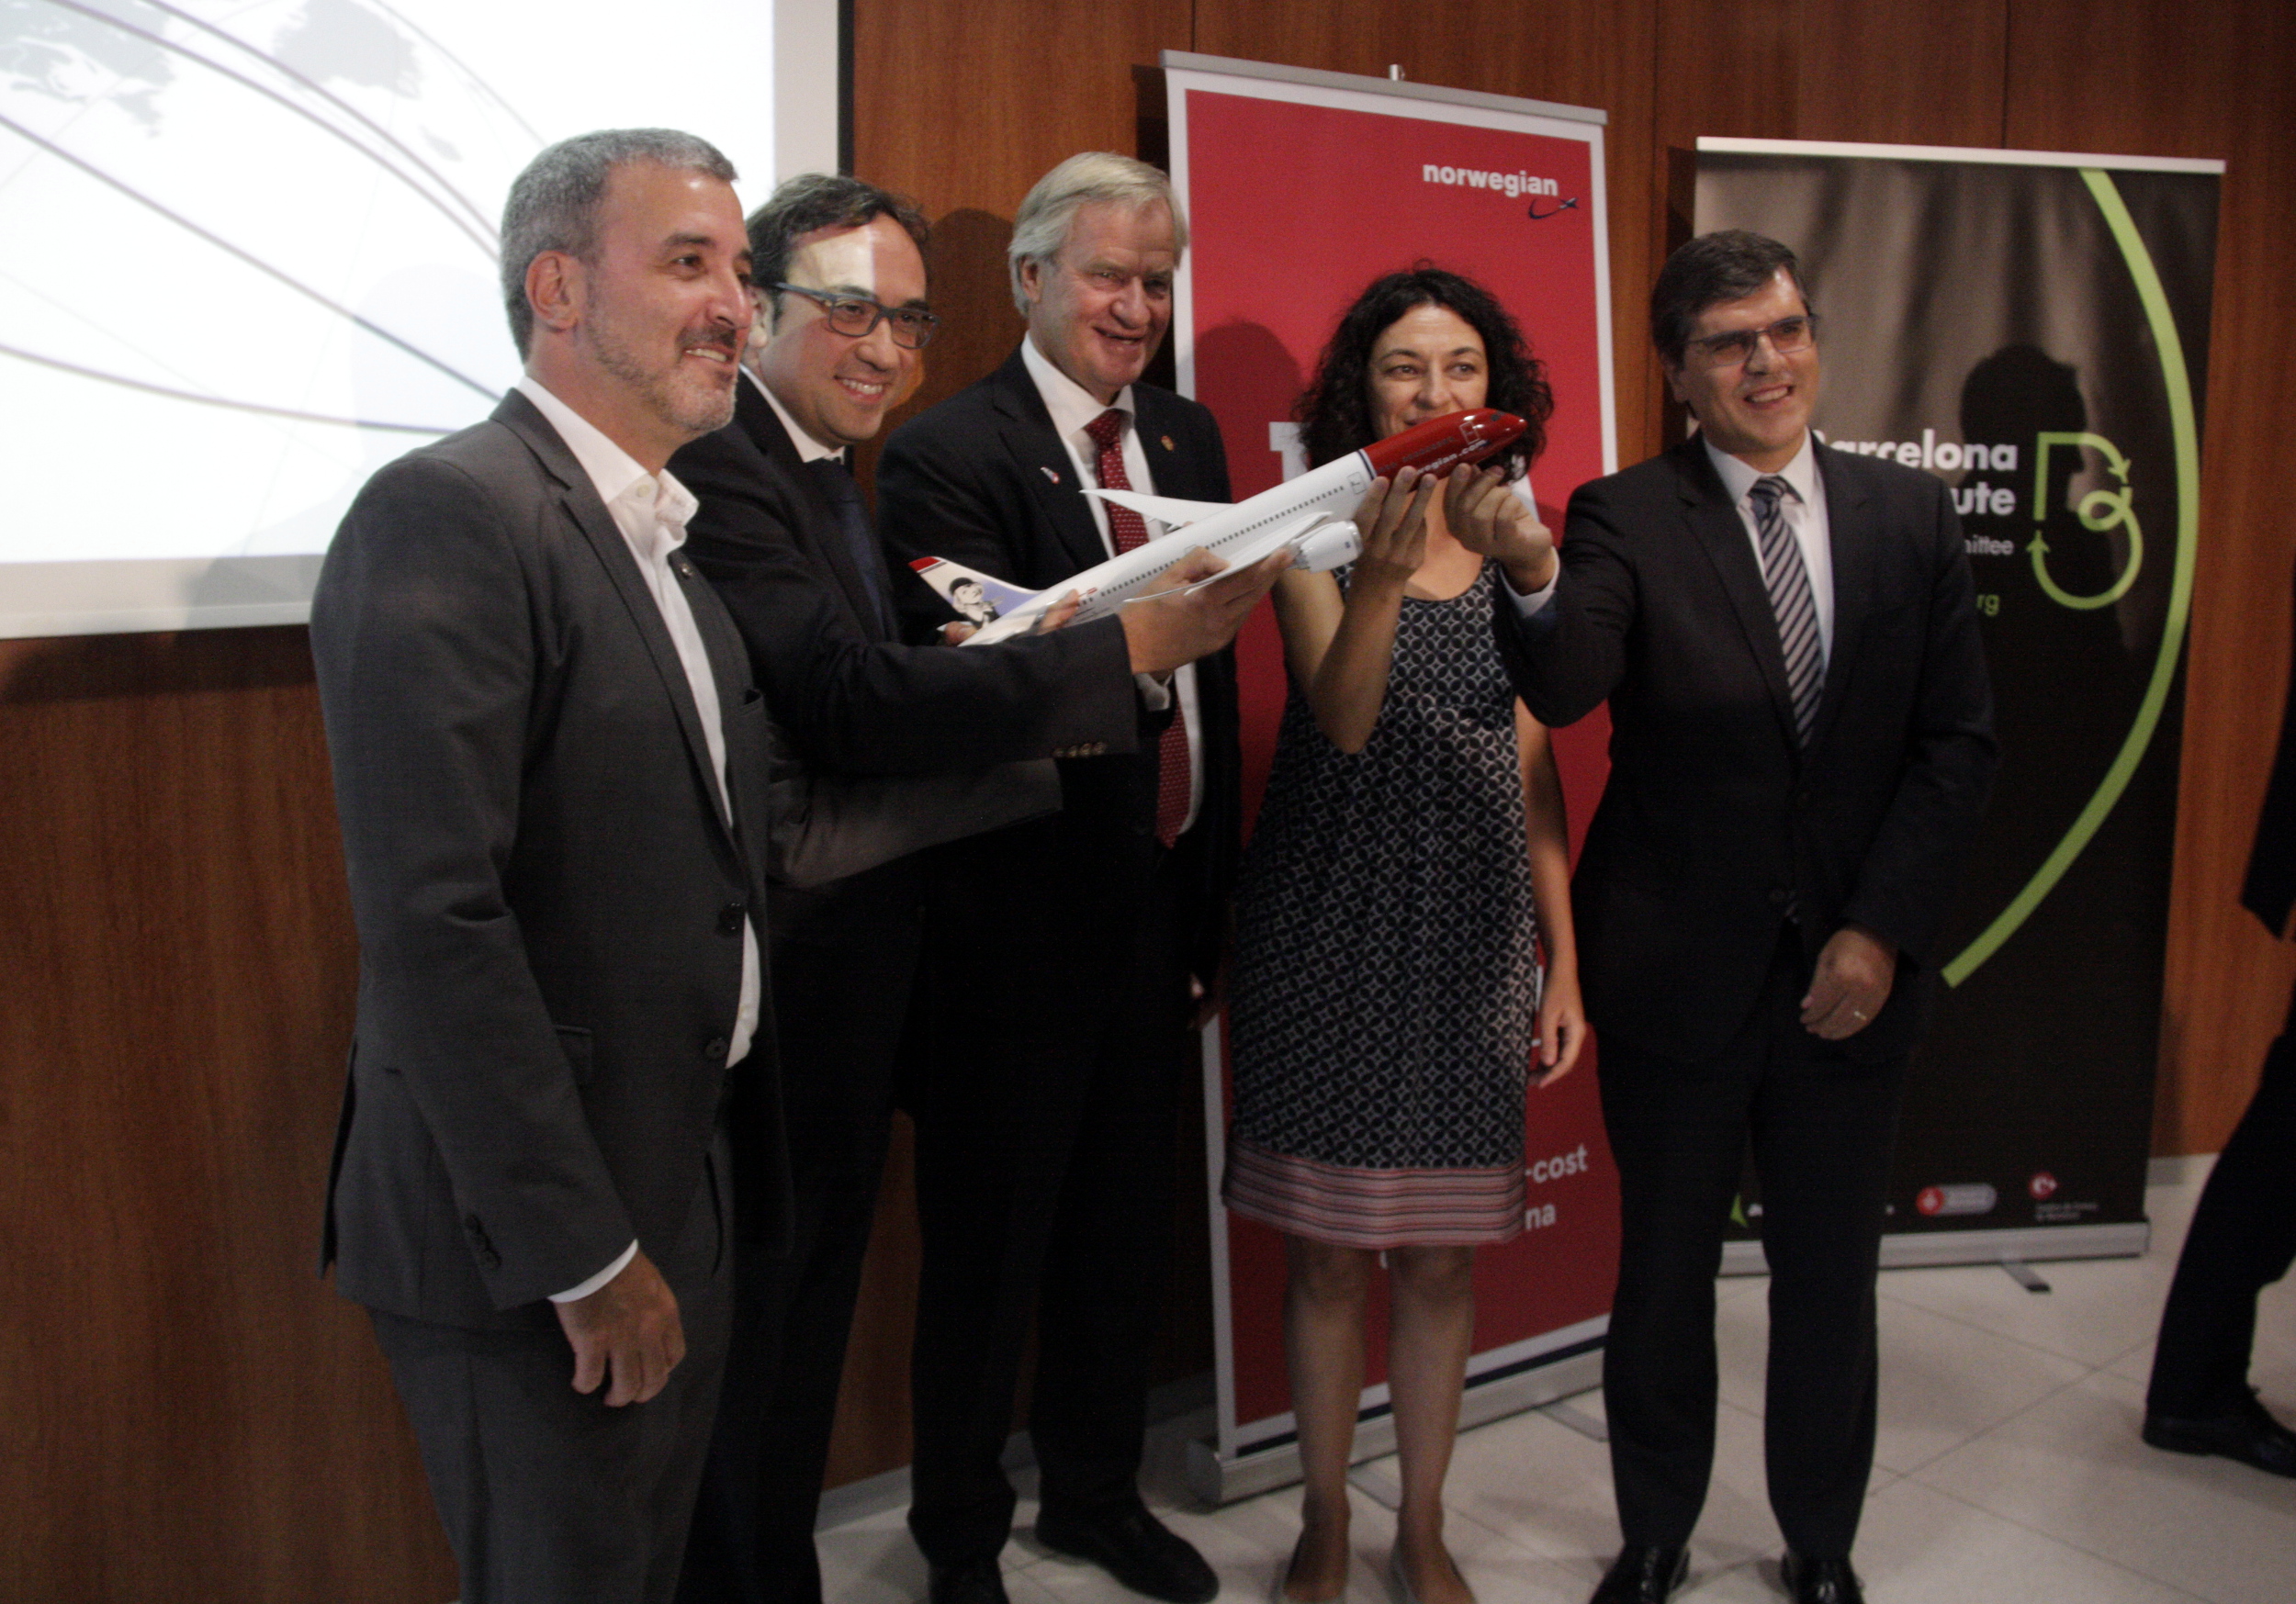 Norwegian's CEO, Bjorn Kjos, together with Catalan Minister for Territory and Sustainability, Josep Rull, Barcelona's Deputy Mayor, Jaume Collboni and El Prat Airport's Director, Sònia Corrochano (by ACN)